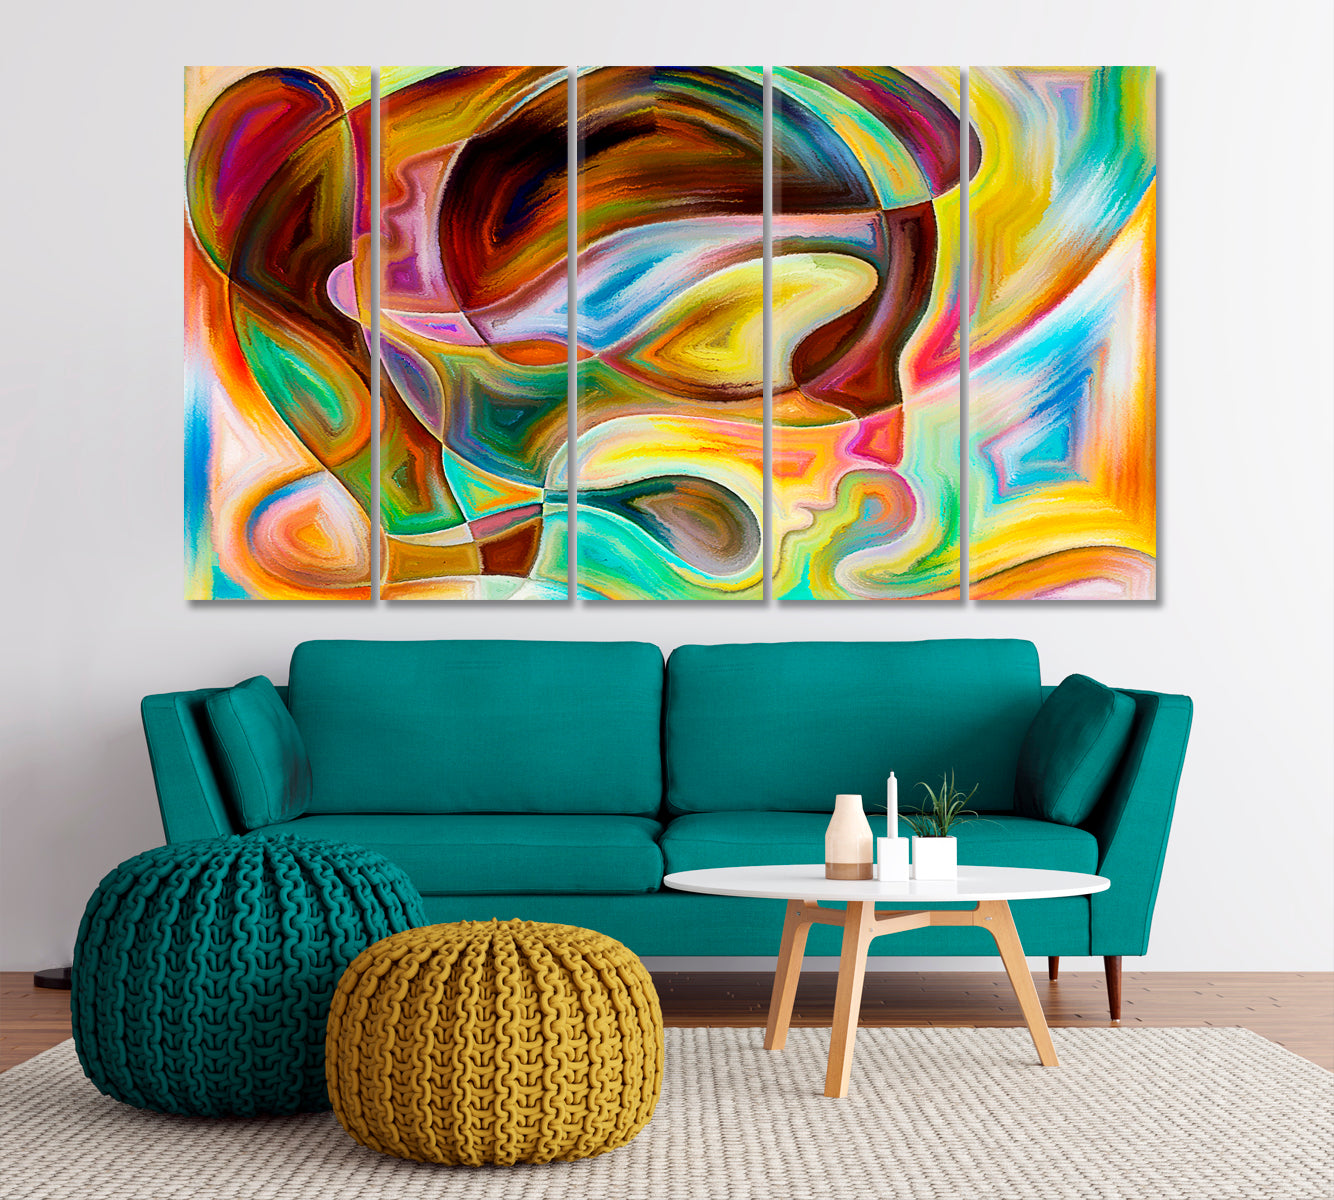 Modern Design of Human Emotions In Colors And Shapes Abstract Art Print Artesty 5 panels 36" x 24" 